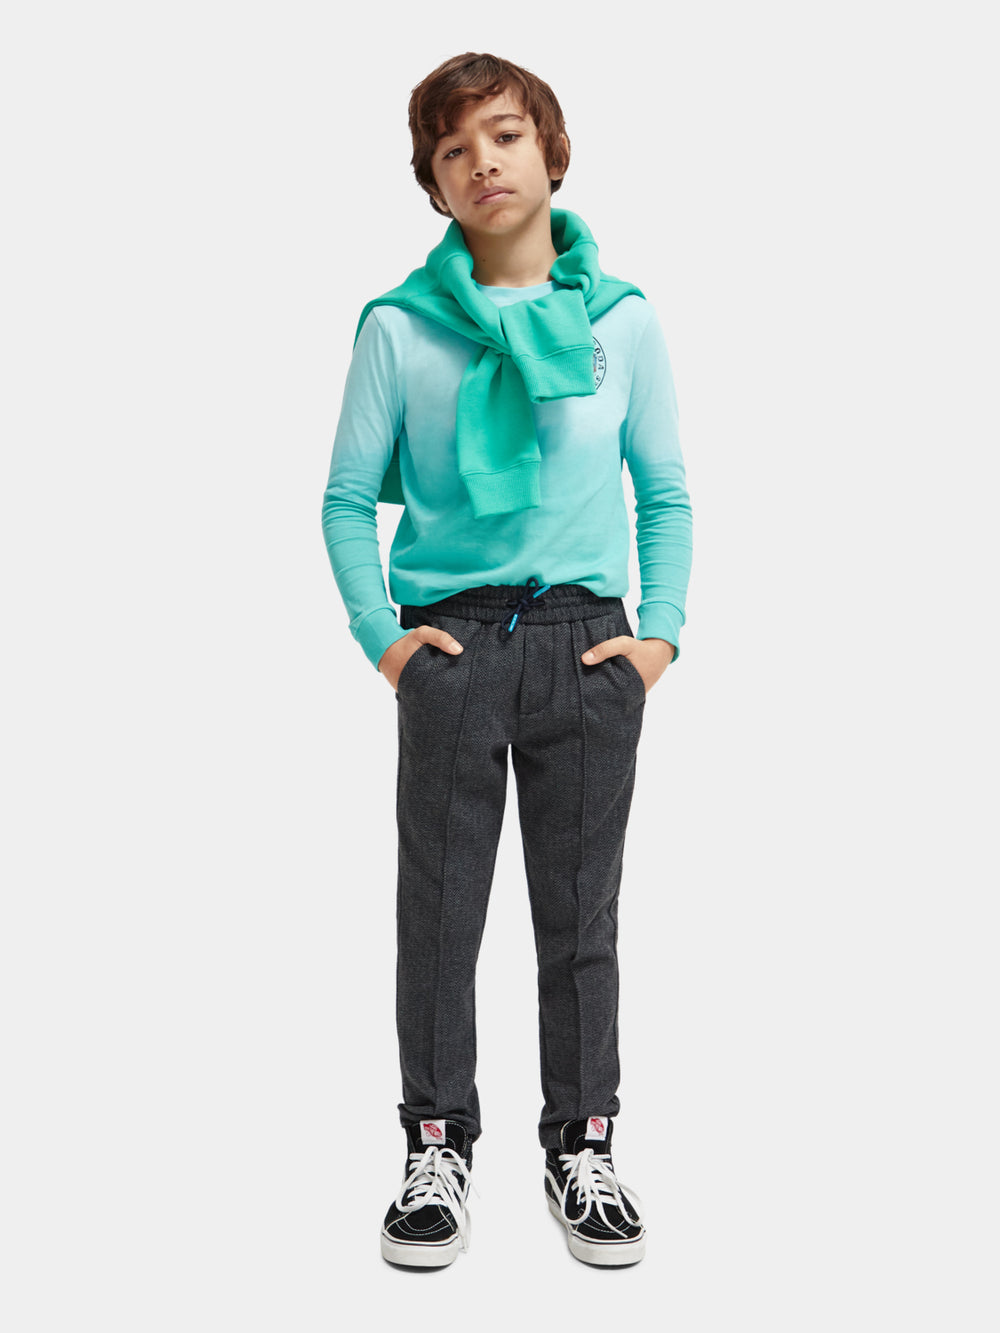 Kids - Relaxed slim-fit knitted pants - Scotch & Soda NZ